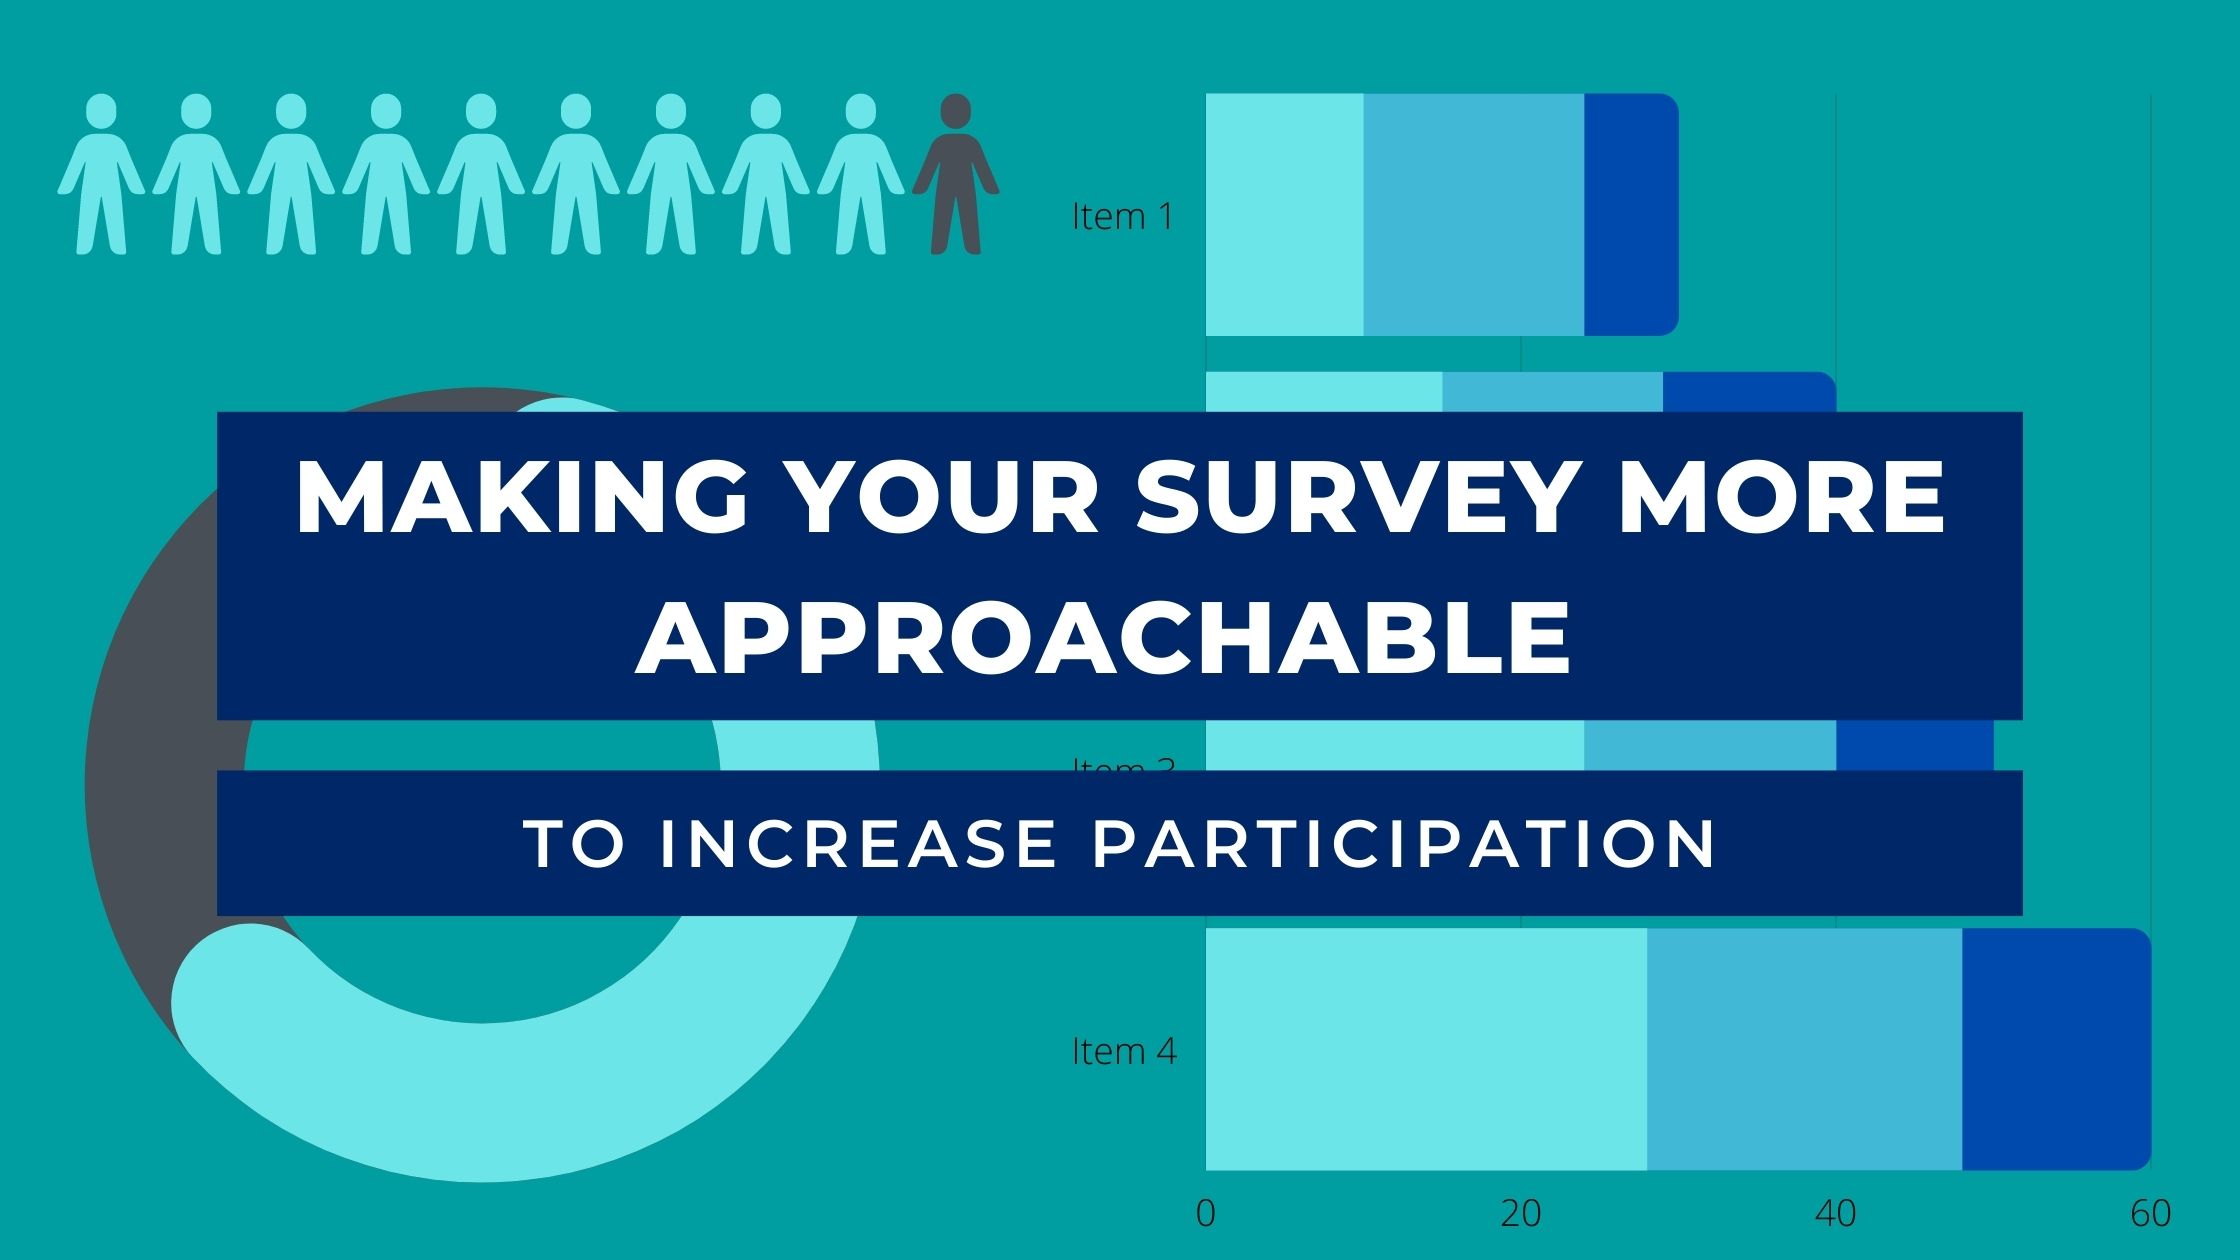 Making your survey more approachable to increase participation